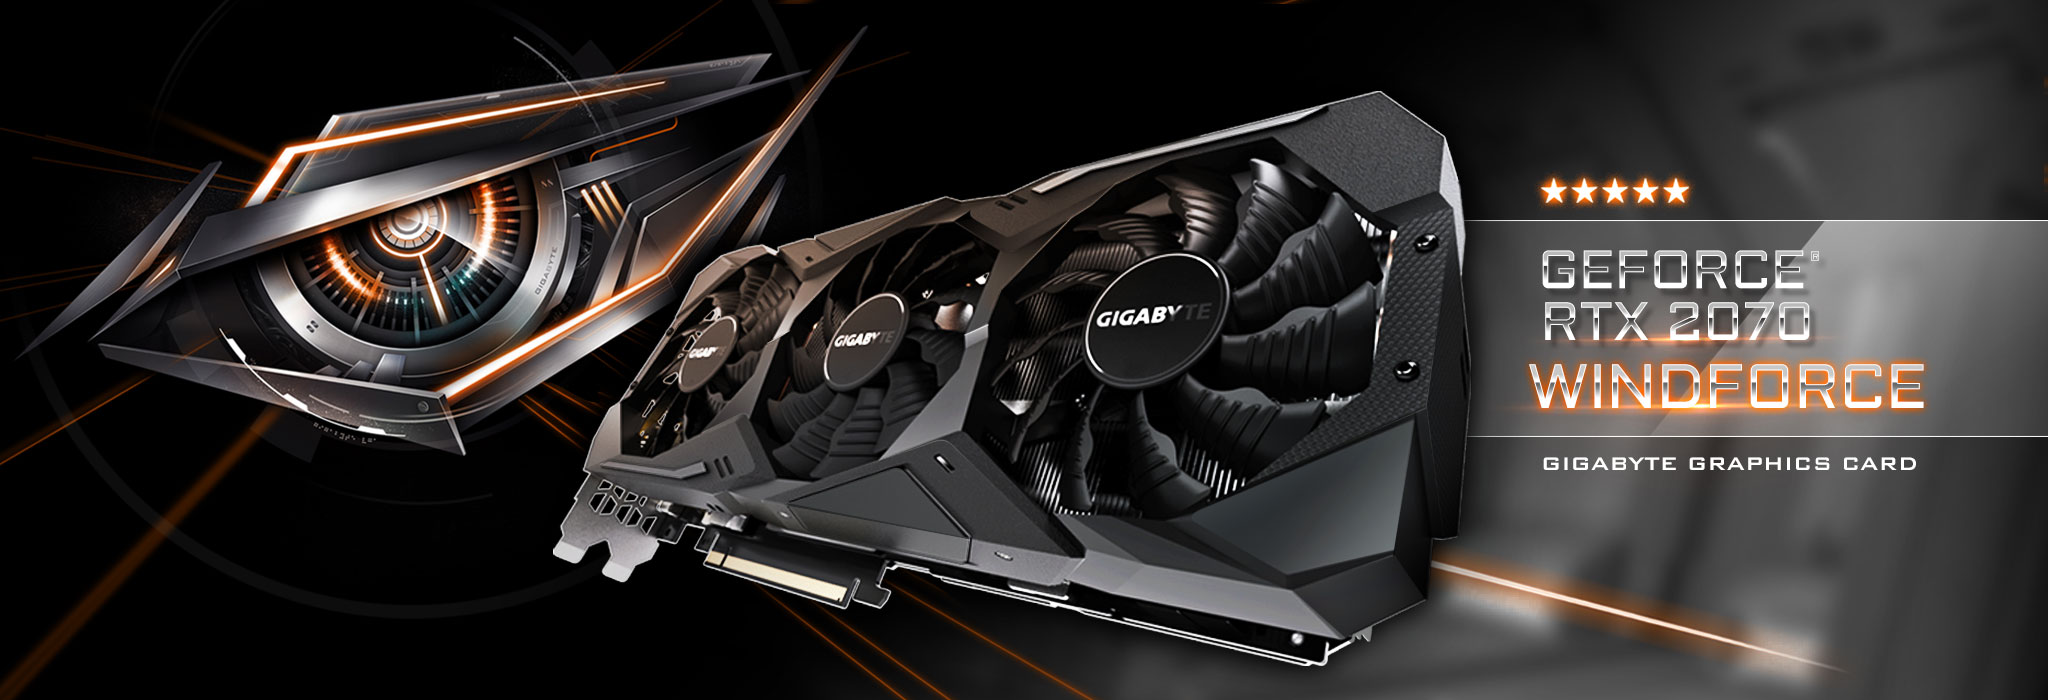 GeForce RTX™ WINDFORCE 8G Key Features Graphics Card - GIGABYTE Global